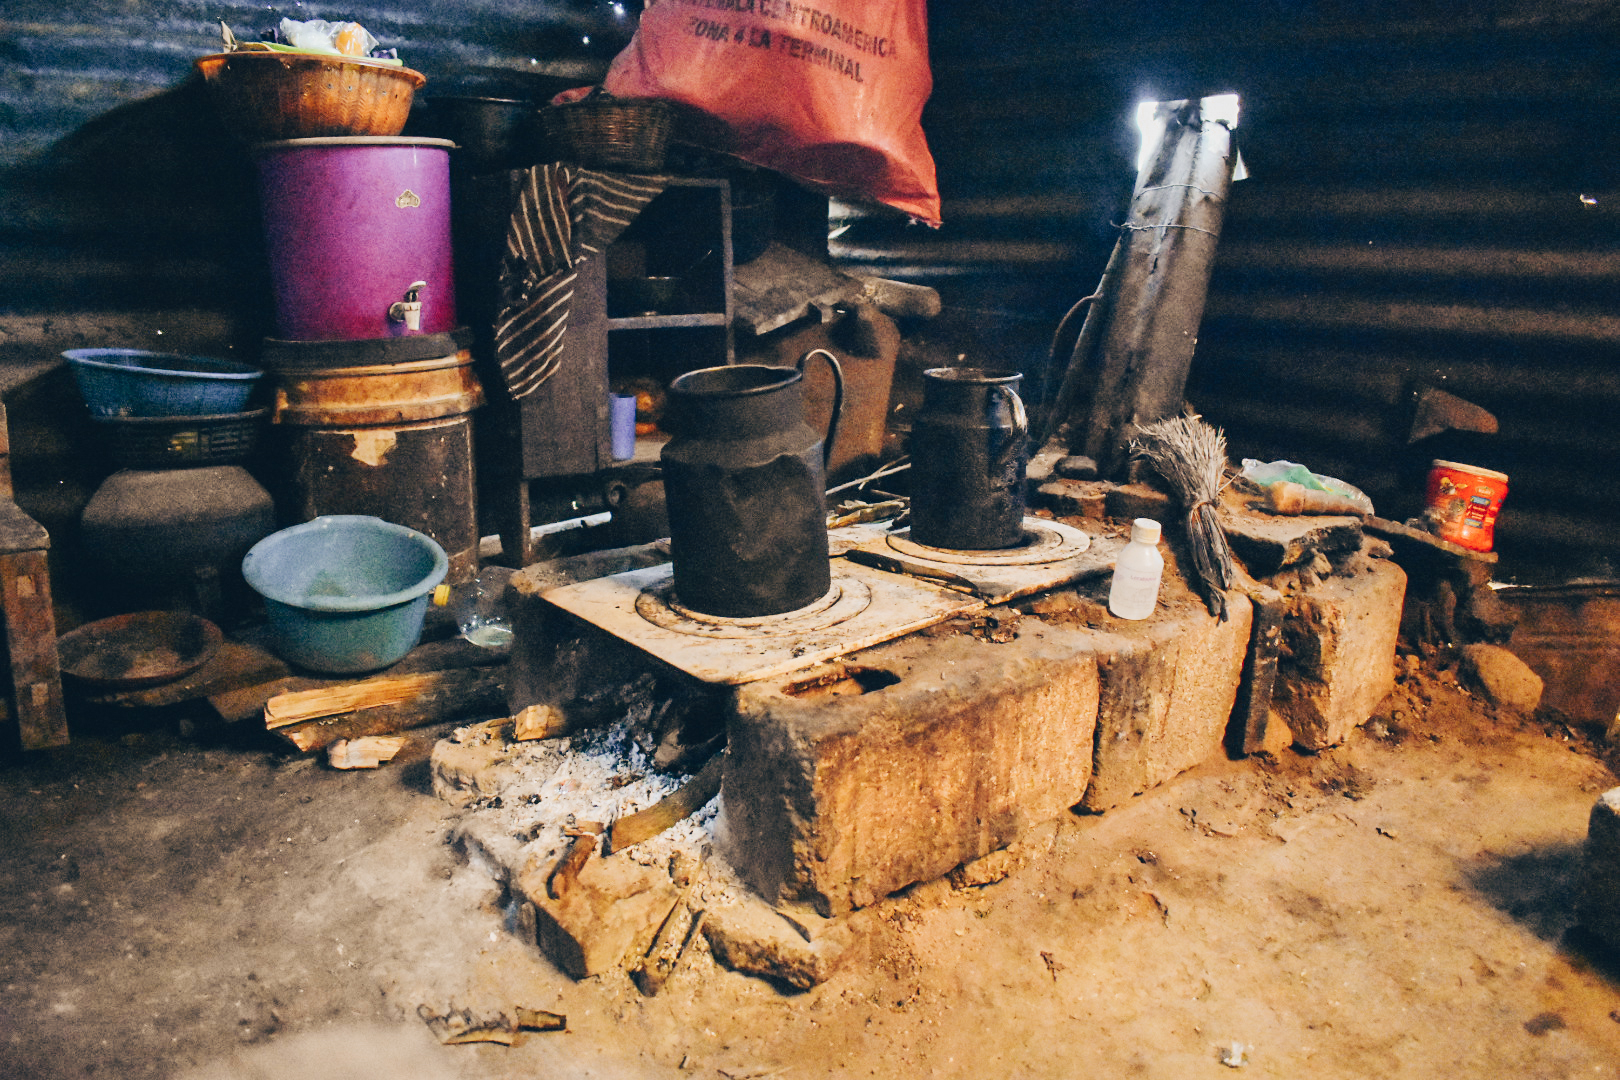  The old stoves were neither fuel nor time efficient, and kept large quantities of smoke instead the homes. The average Guatemalan stove produces up to 400 cigarette’s worth of smoke in just one hour, and gathering the high quantities of wood needed 